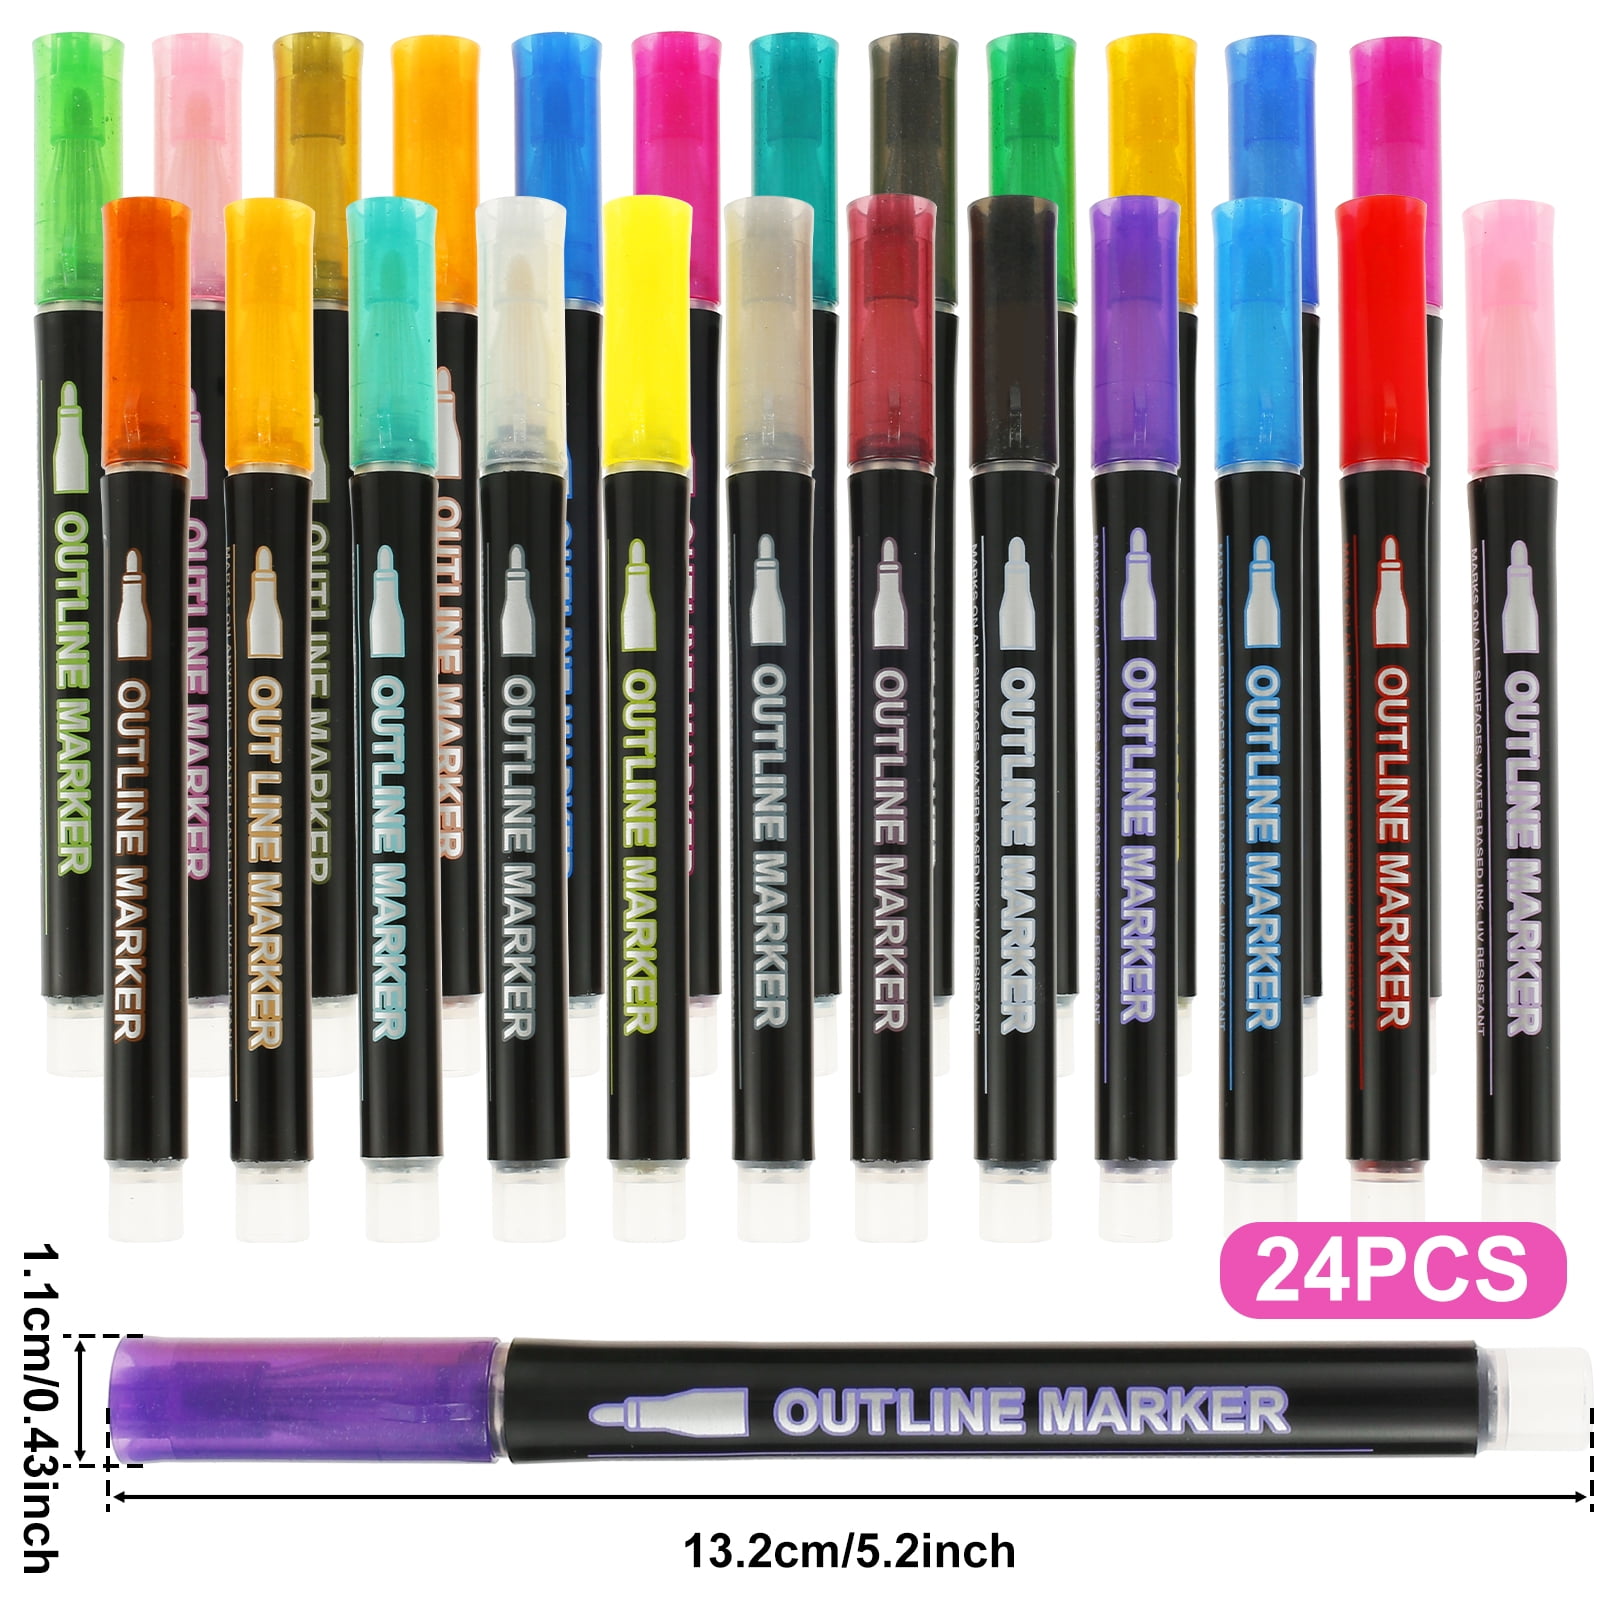 NewSoul 12 Colors Outline Markers Shimmer Double Line Marker Pen